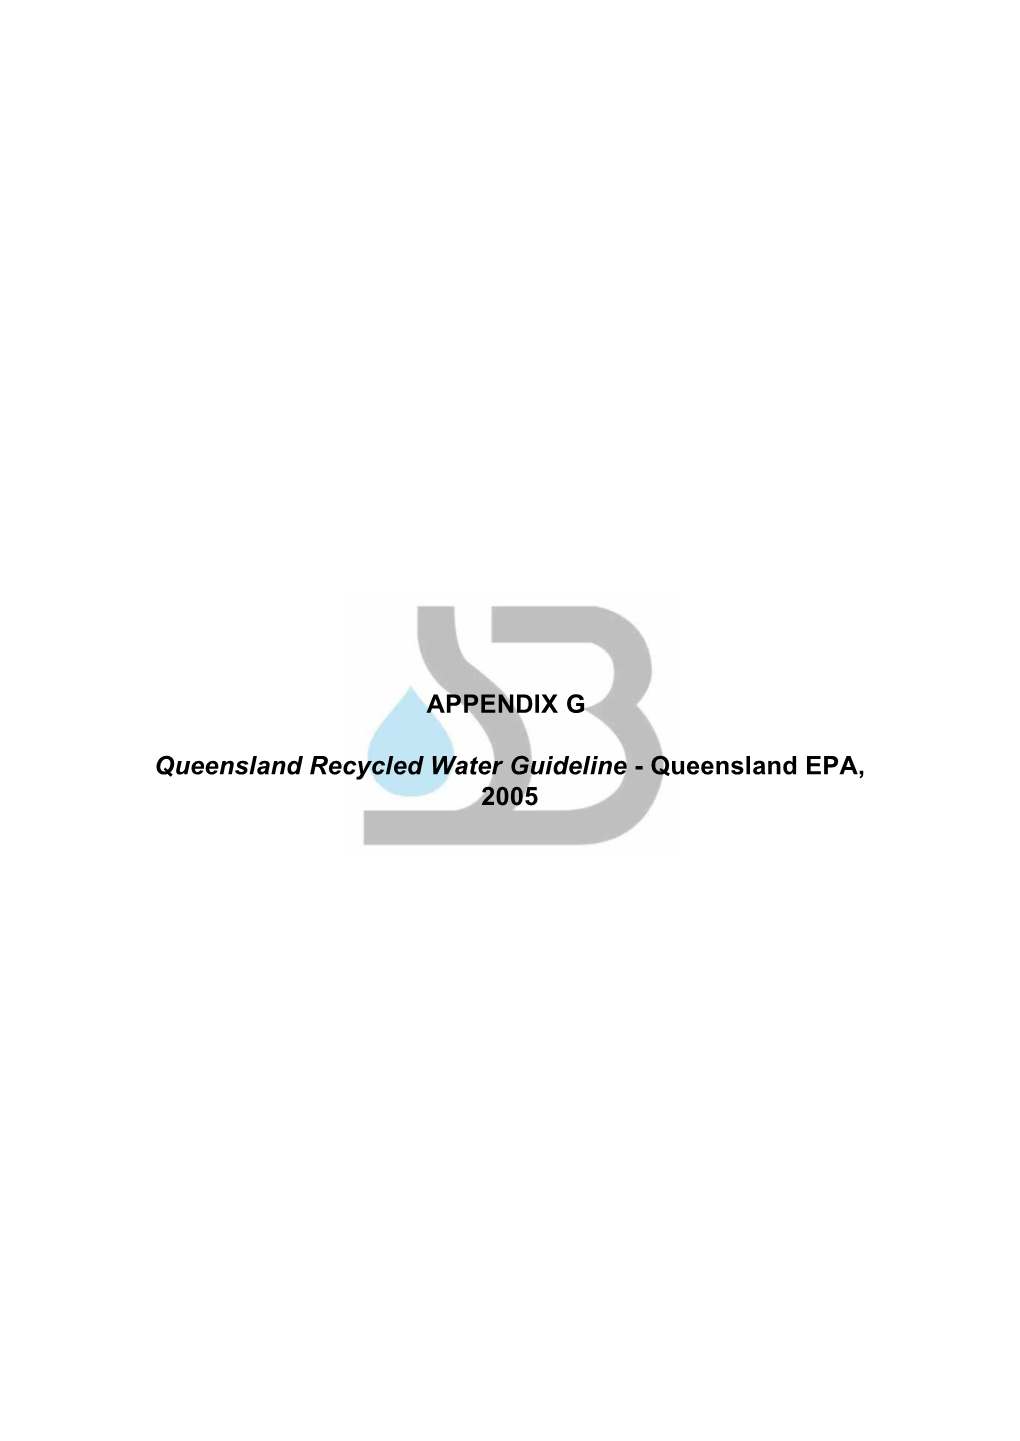 APPENDIX G Queensland Recycled Water Guideline